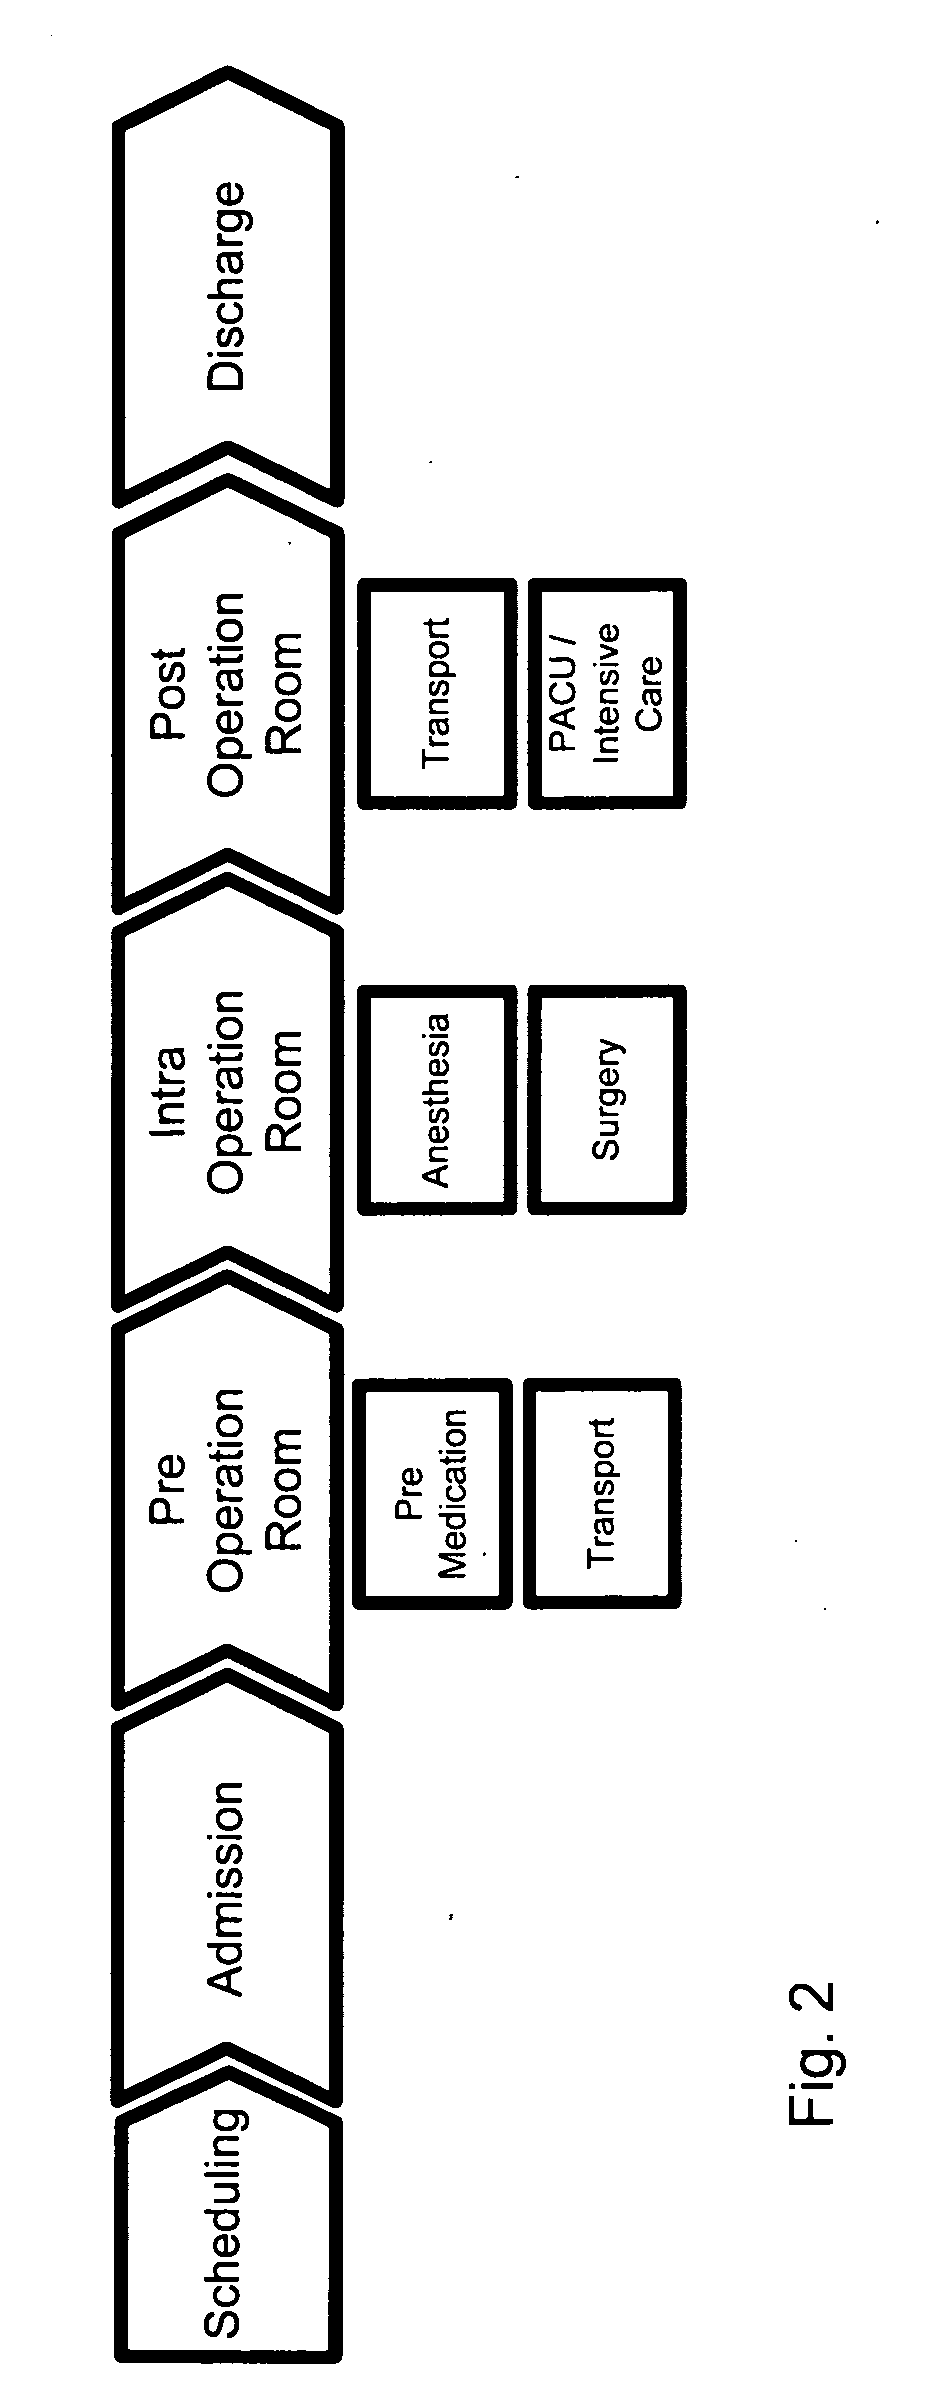 Method and System for Management of Operating-Room Resources